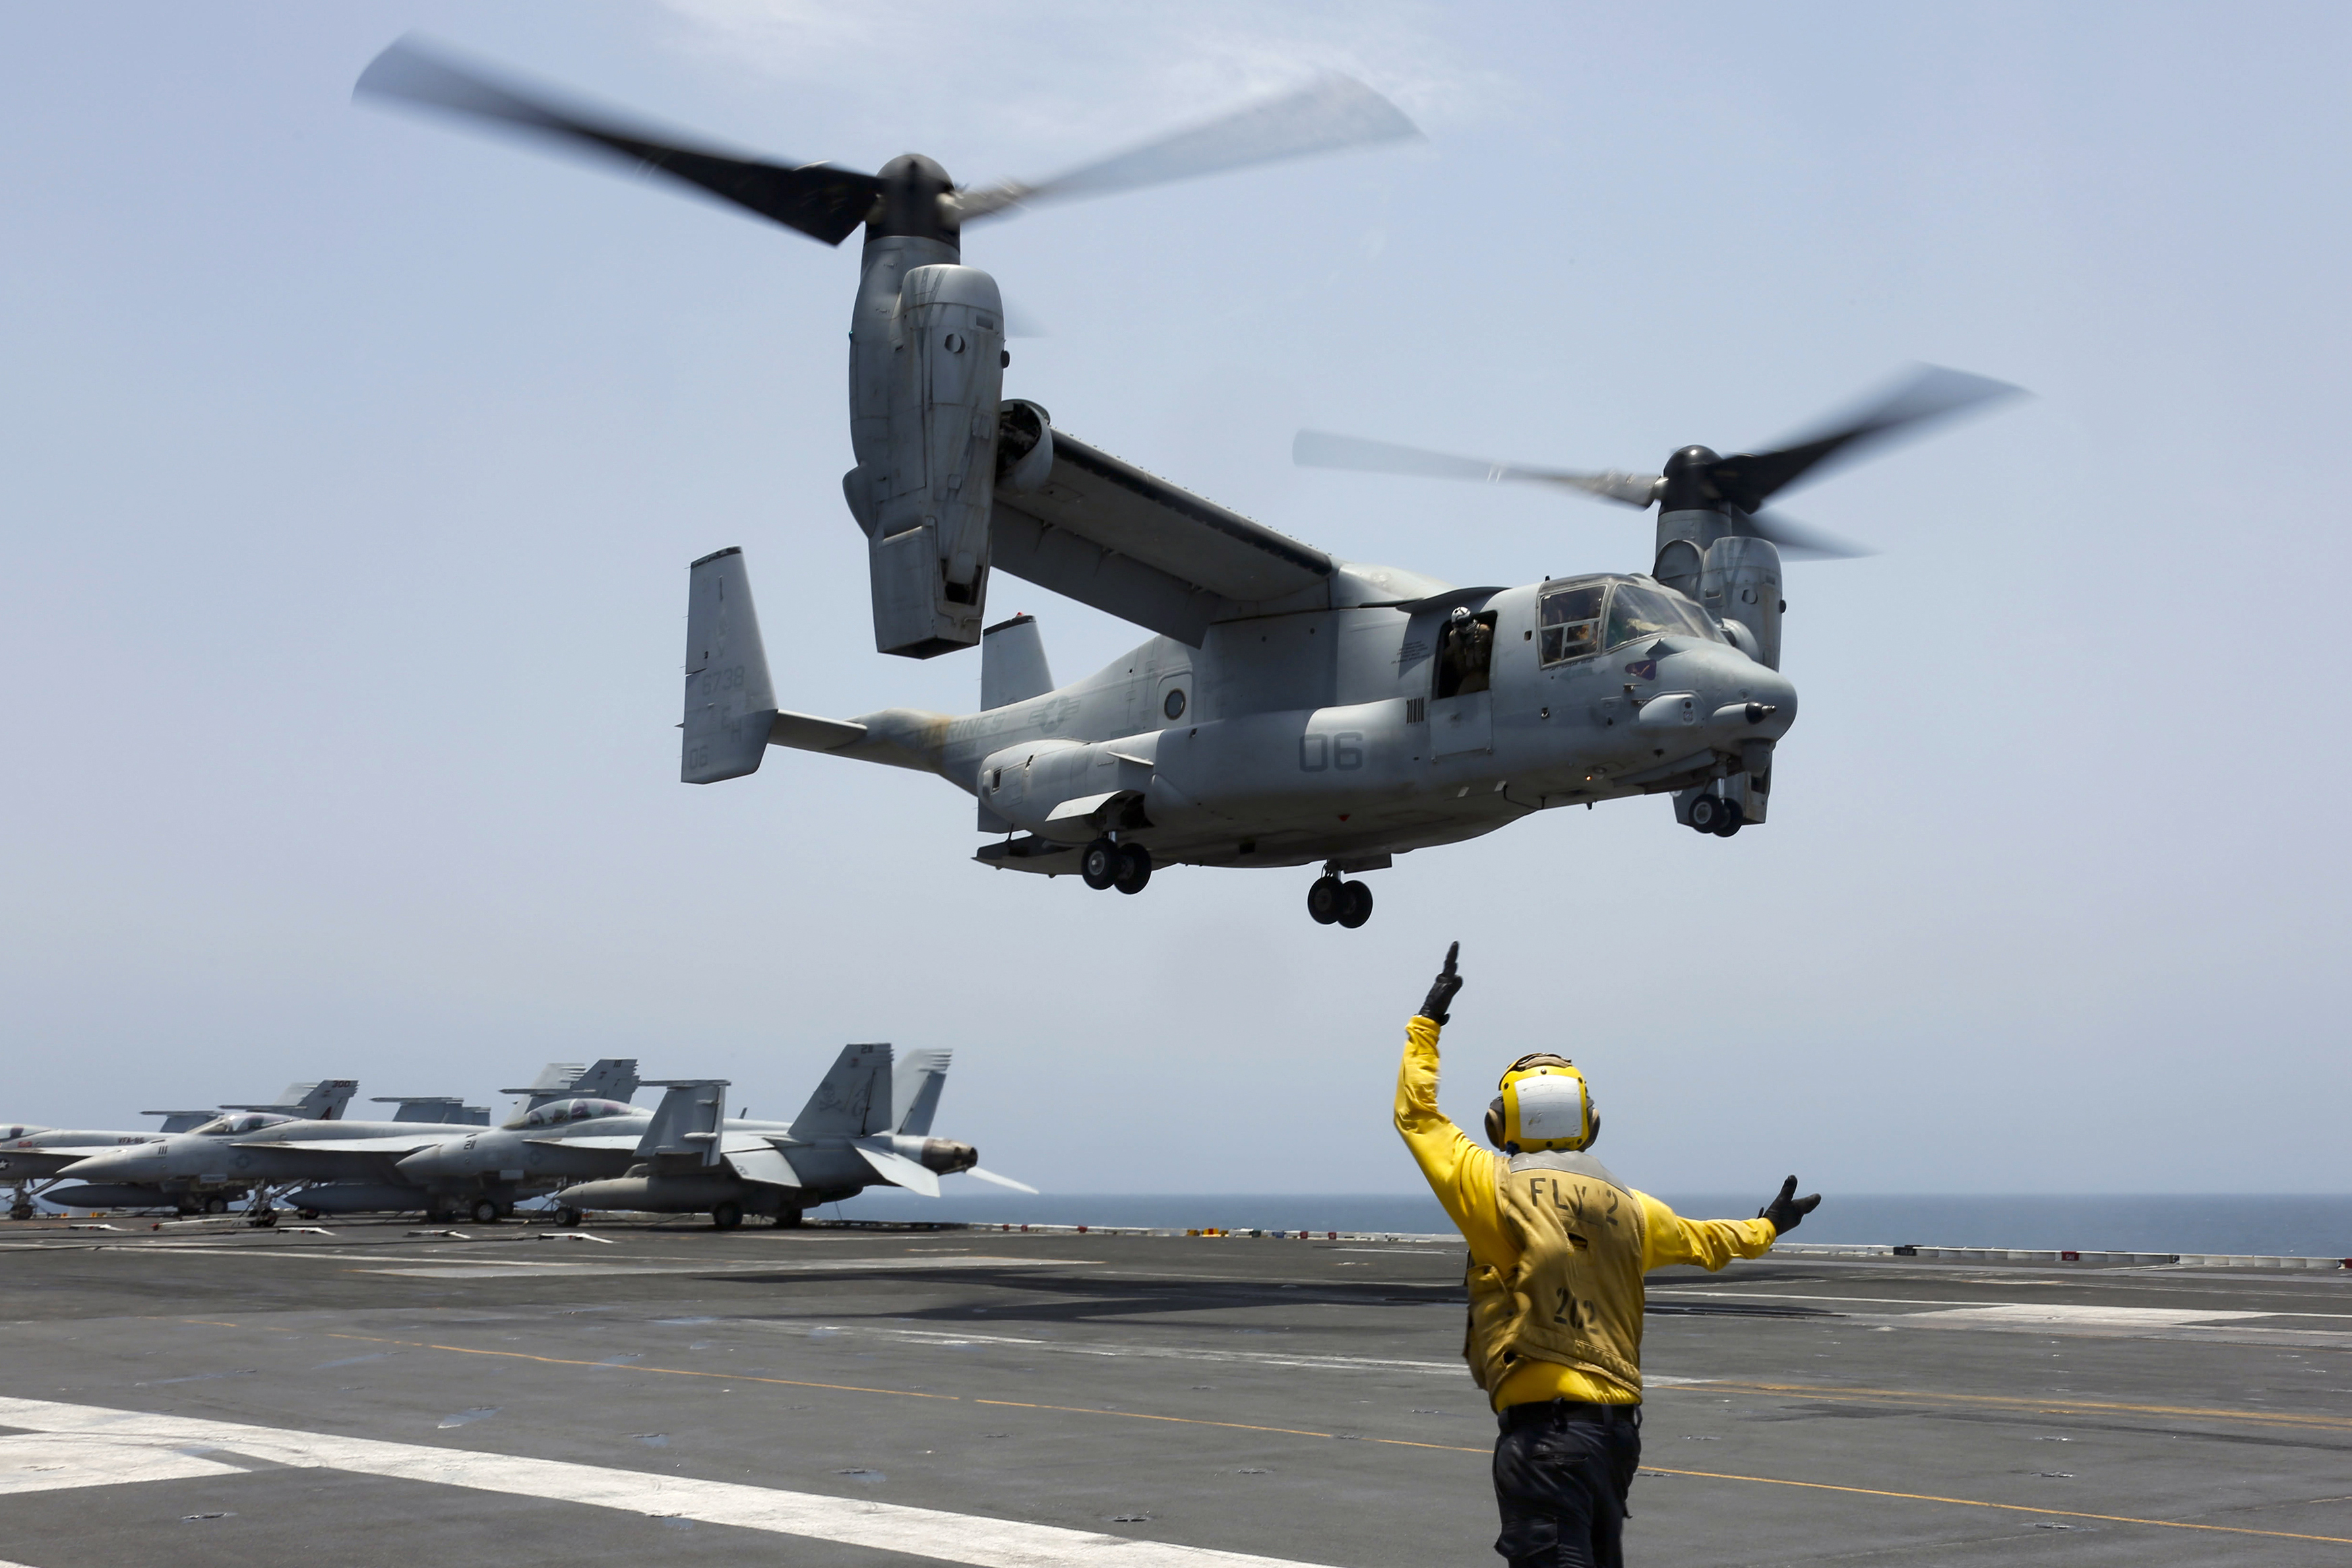 FILE - In this image provided by the U.S. Navy, Aviation Boatswain's Mate 2nd Class Nicholas Hawkins signals an MV-22 Osprey to land on the flight deck of the USS Abraham Lincoln in the Arabian Sea on May 17, 2019. Three Massachusetts lawmakers are pressing Defense Secretary Lloyd Austin to extend flight restrictions on the V-22 Osprey until the military can identify the root causes of multiple recent accidents. Democratic Sens. Elizabeth Warren and Ed Markey and Rep. Lloyd Neal in a letter to Austin on Thursday call the decision to return Ospreys to limited flight status misguided. (Mass Communication Specialist 3rd Class Amber Smalley/U.S. Navy via AP)